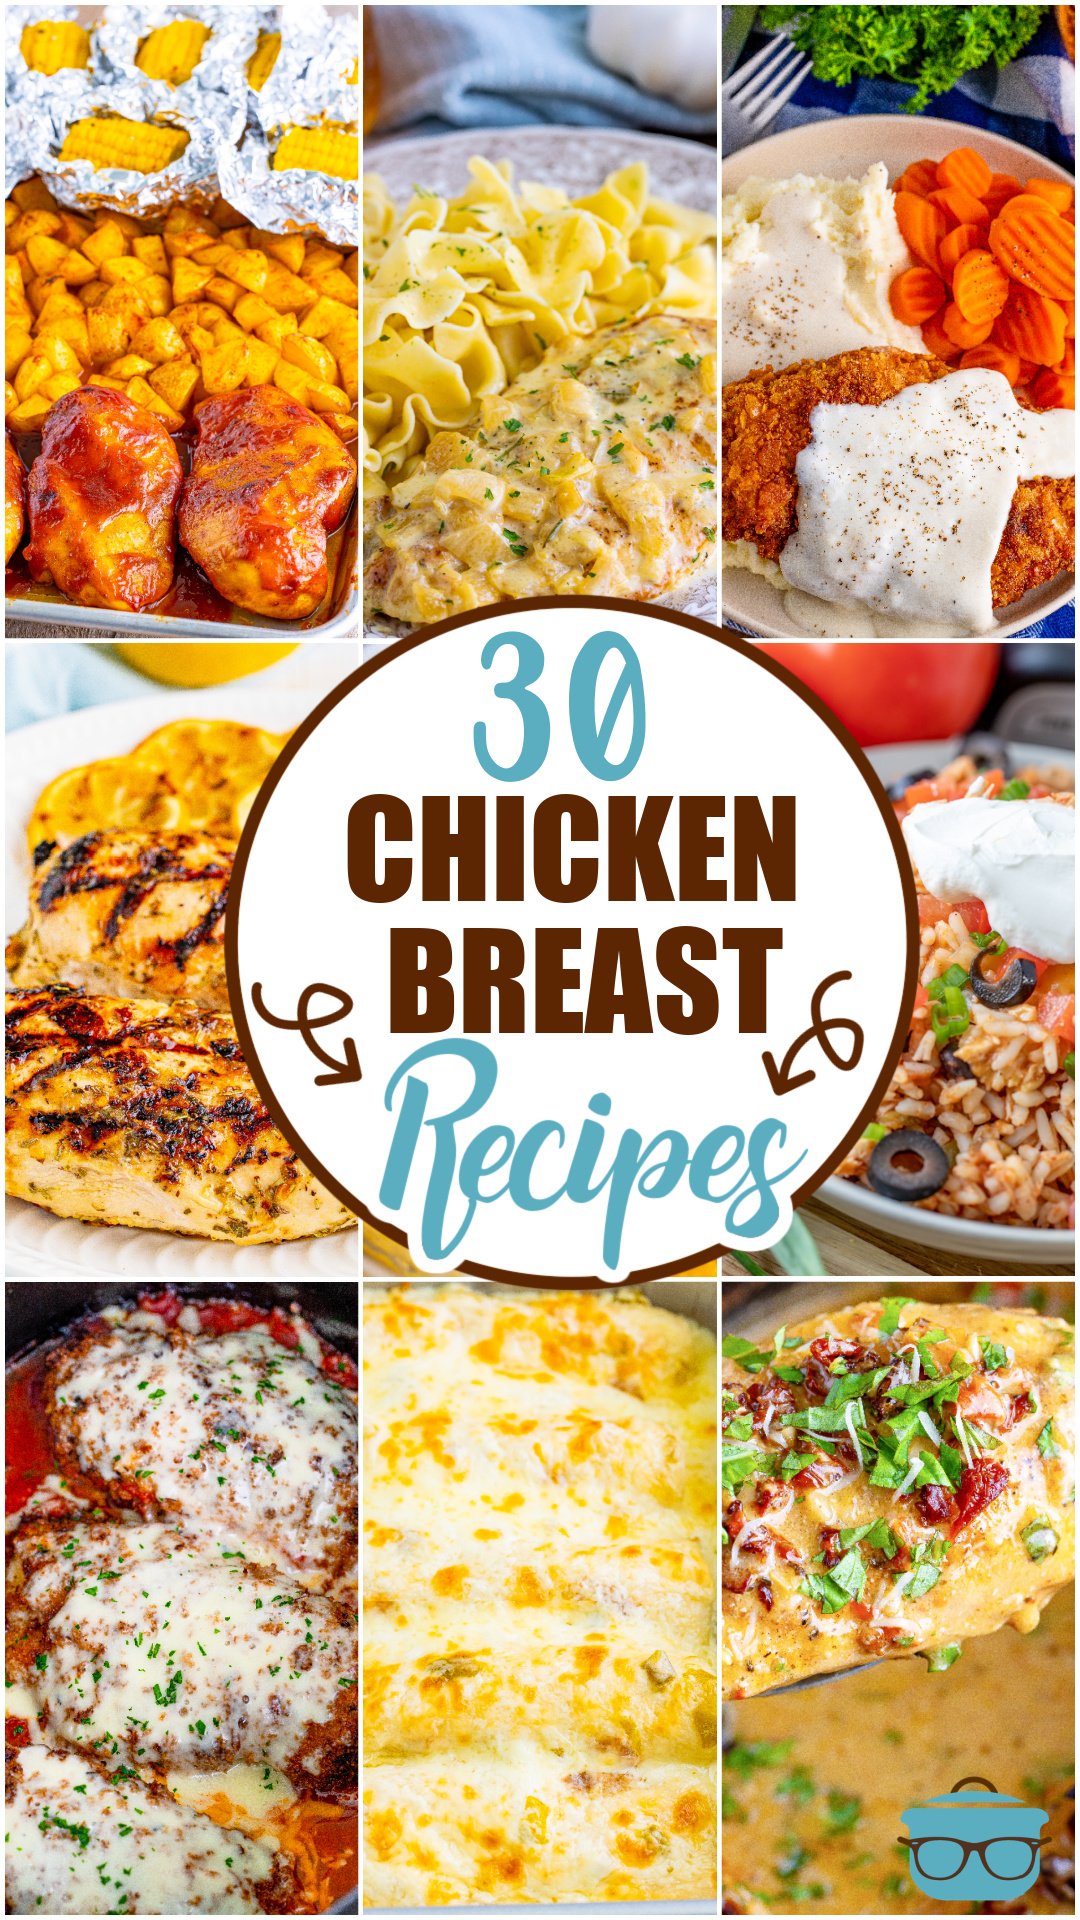 Collage of 9 photos showing chicken breast images with text in the center that says "30 Chicken Breast Recipes".